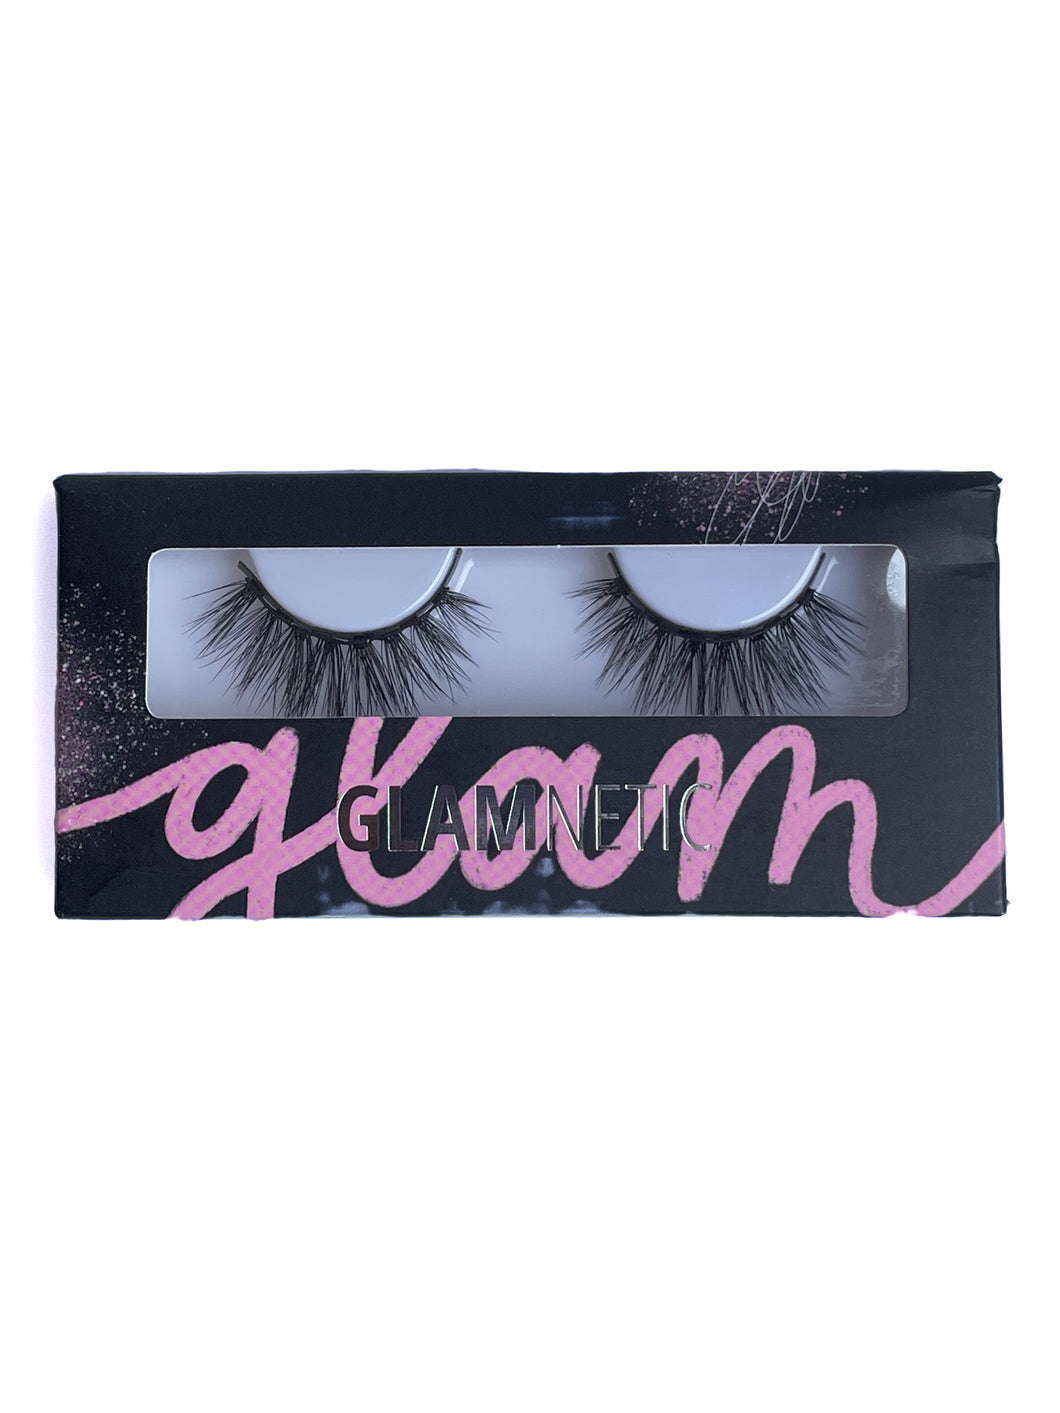 Glamentic magnetic eye lashes | Baby Doll